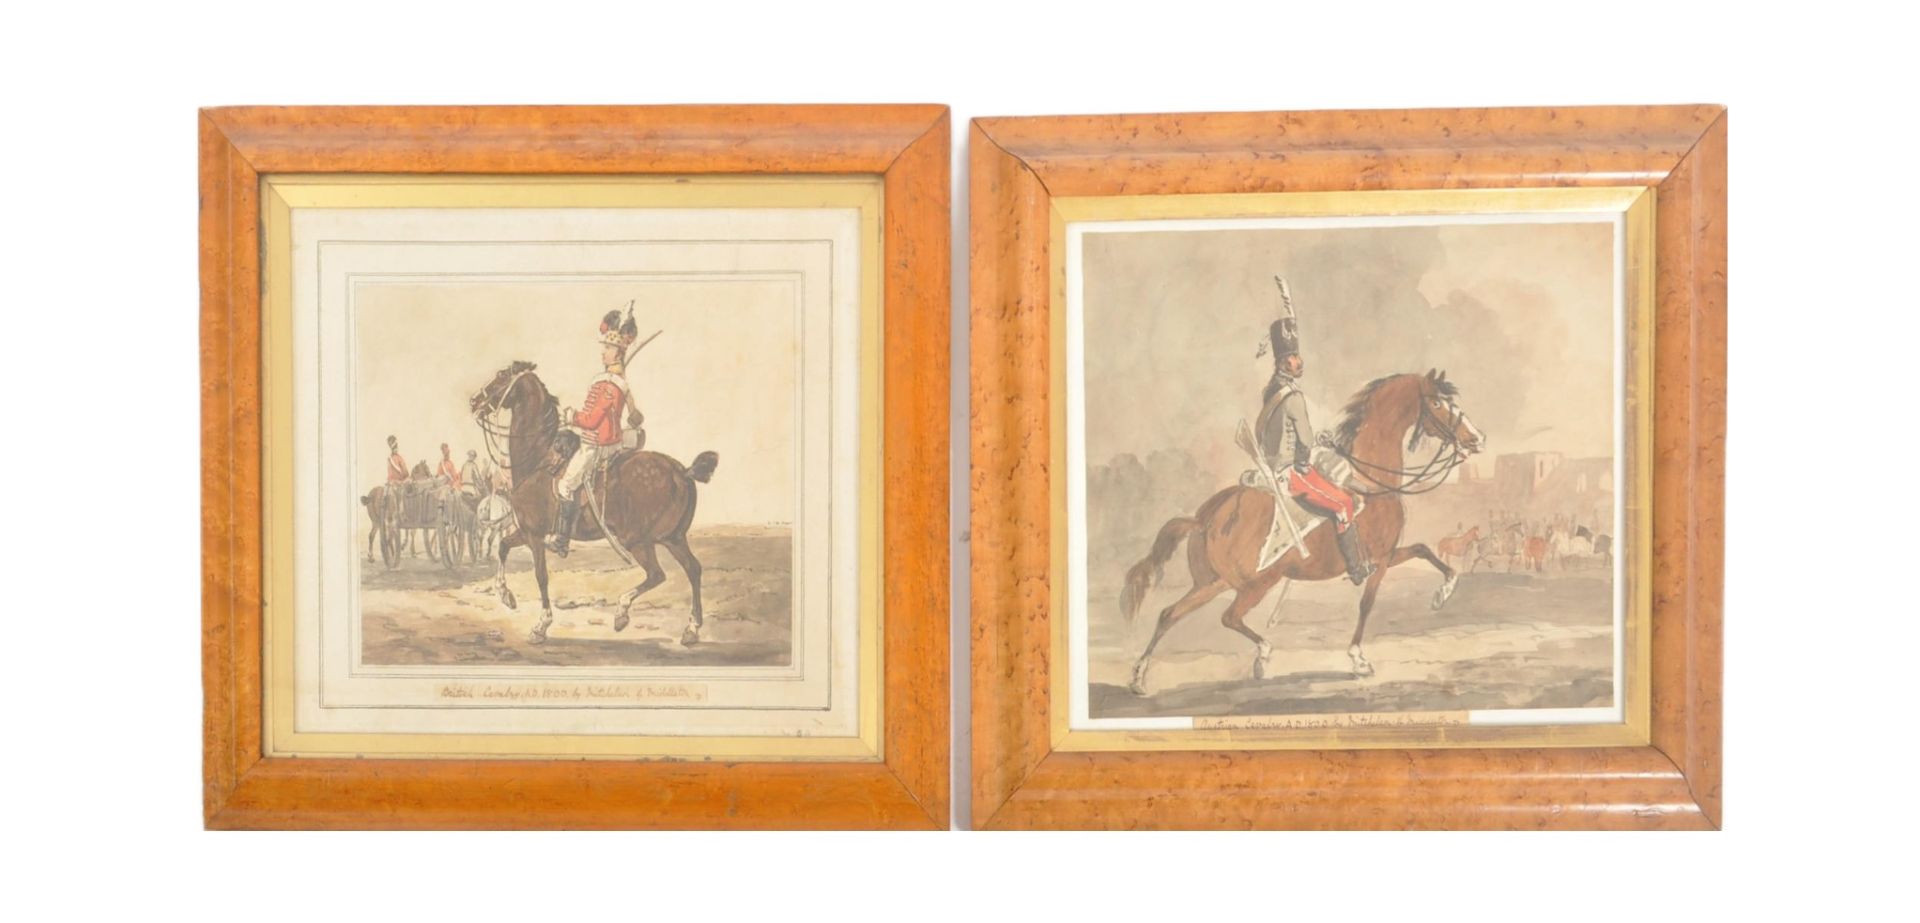 MITCHELSON OF MIDDLETON WATERCOLOUR CAVALRY DRAWINGS.